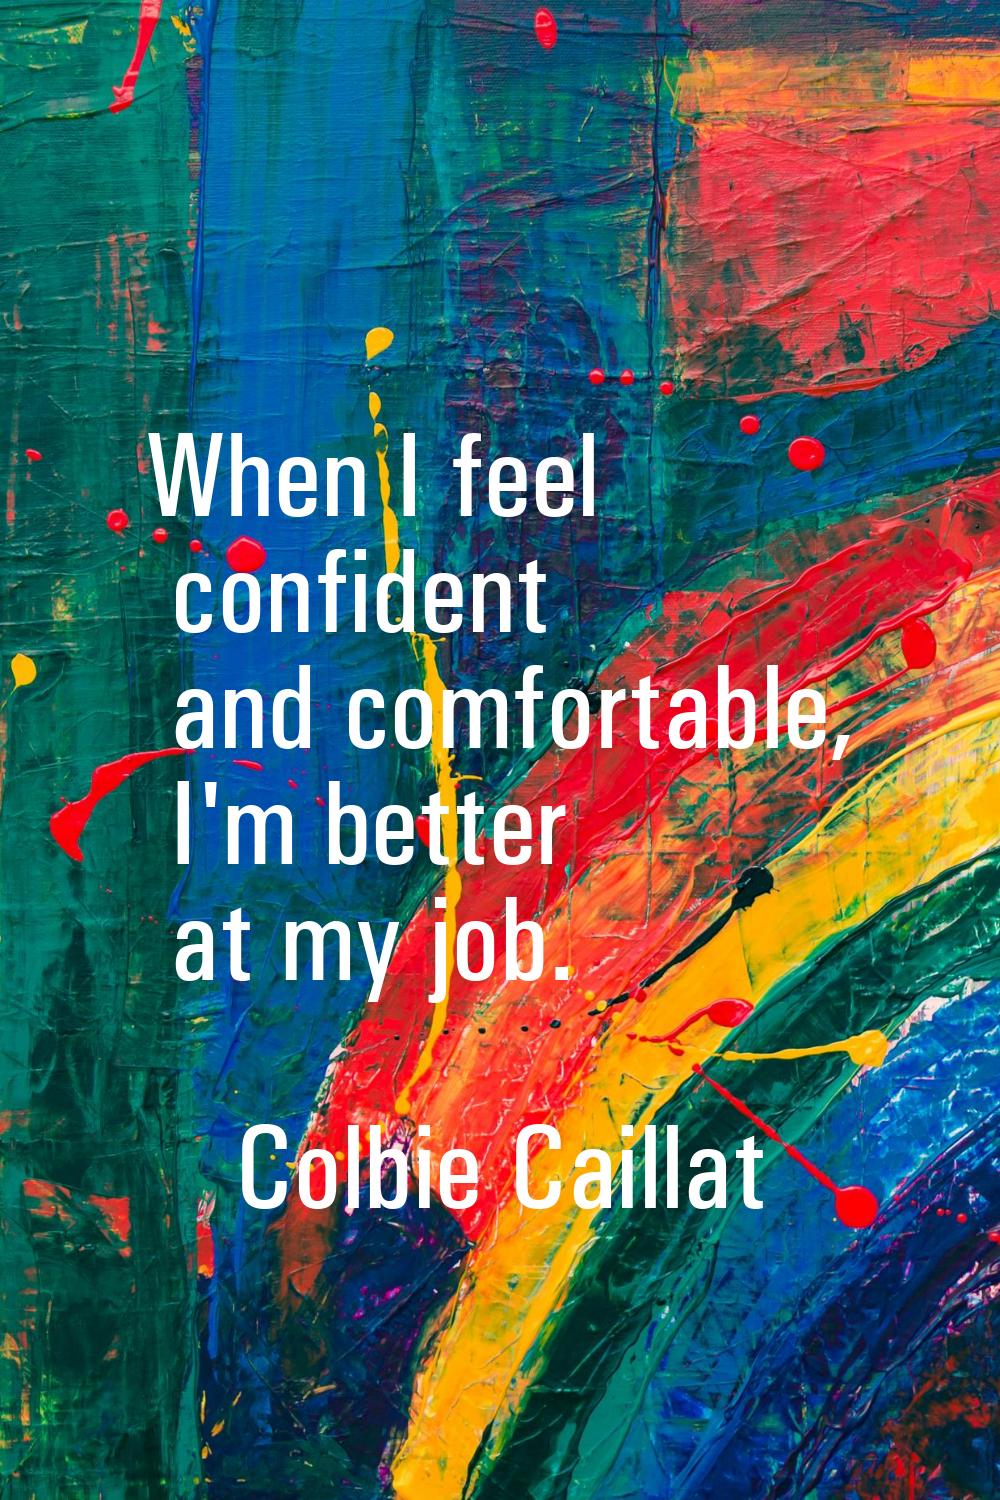 When I feel confident and comfortable, I'm better at my job.